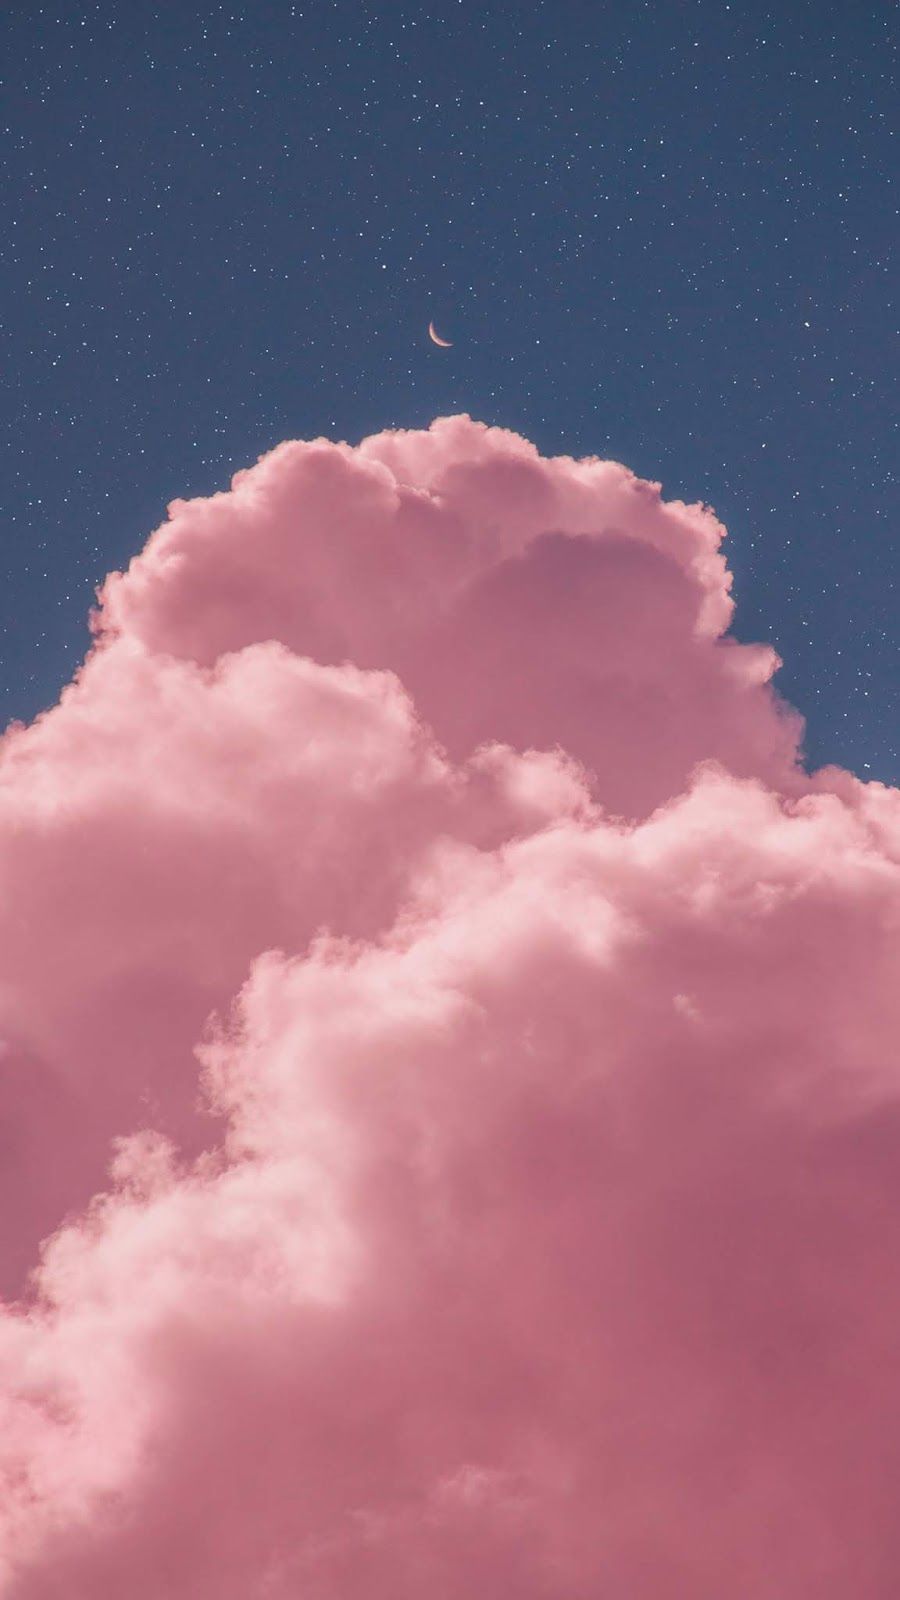 This is heavenly #wallpaper #iphone #android #background #followme. Pink clouds wallpaper, Galaxy wallpaper, Aesthetic iphone wallpaper